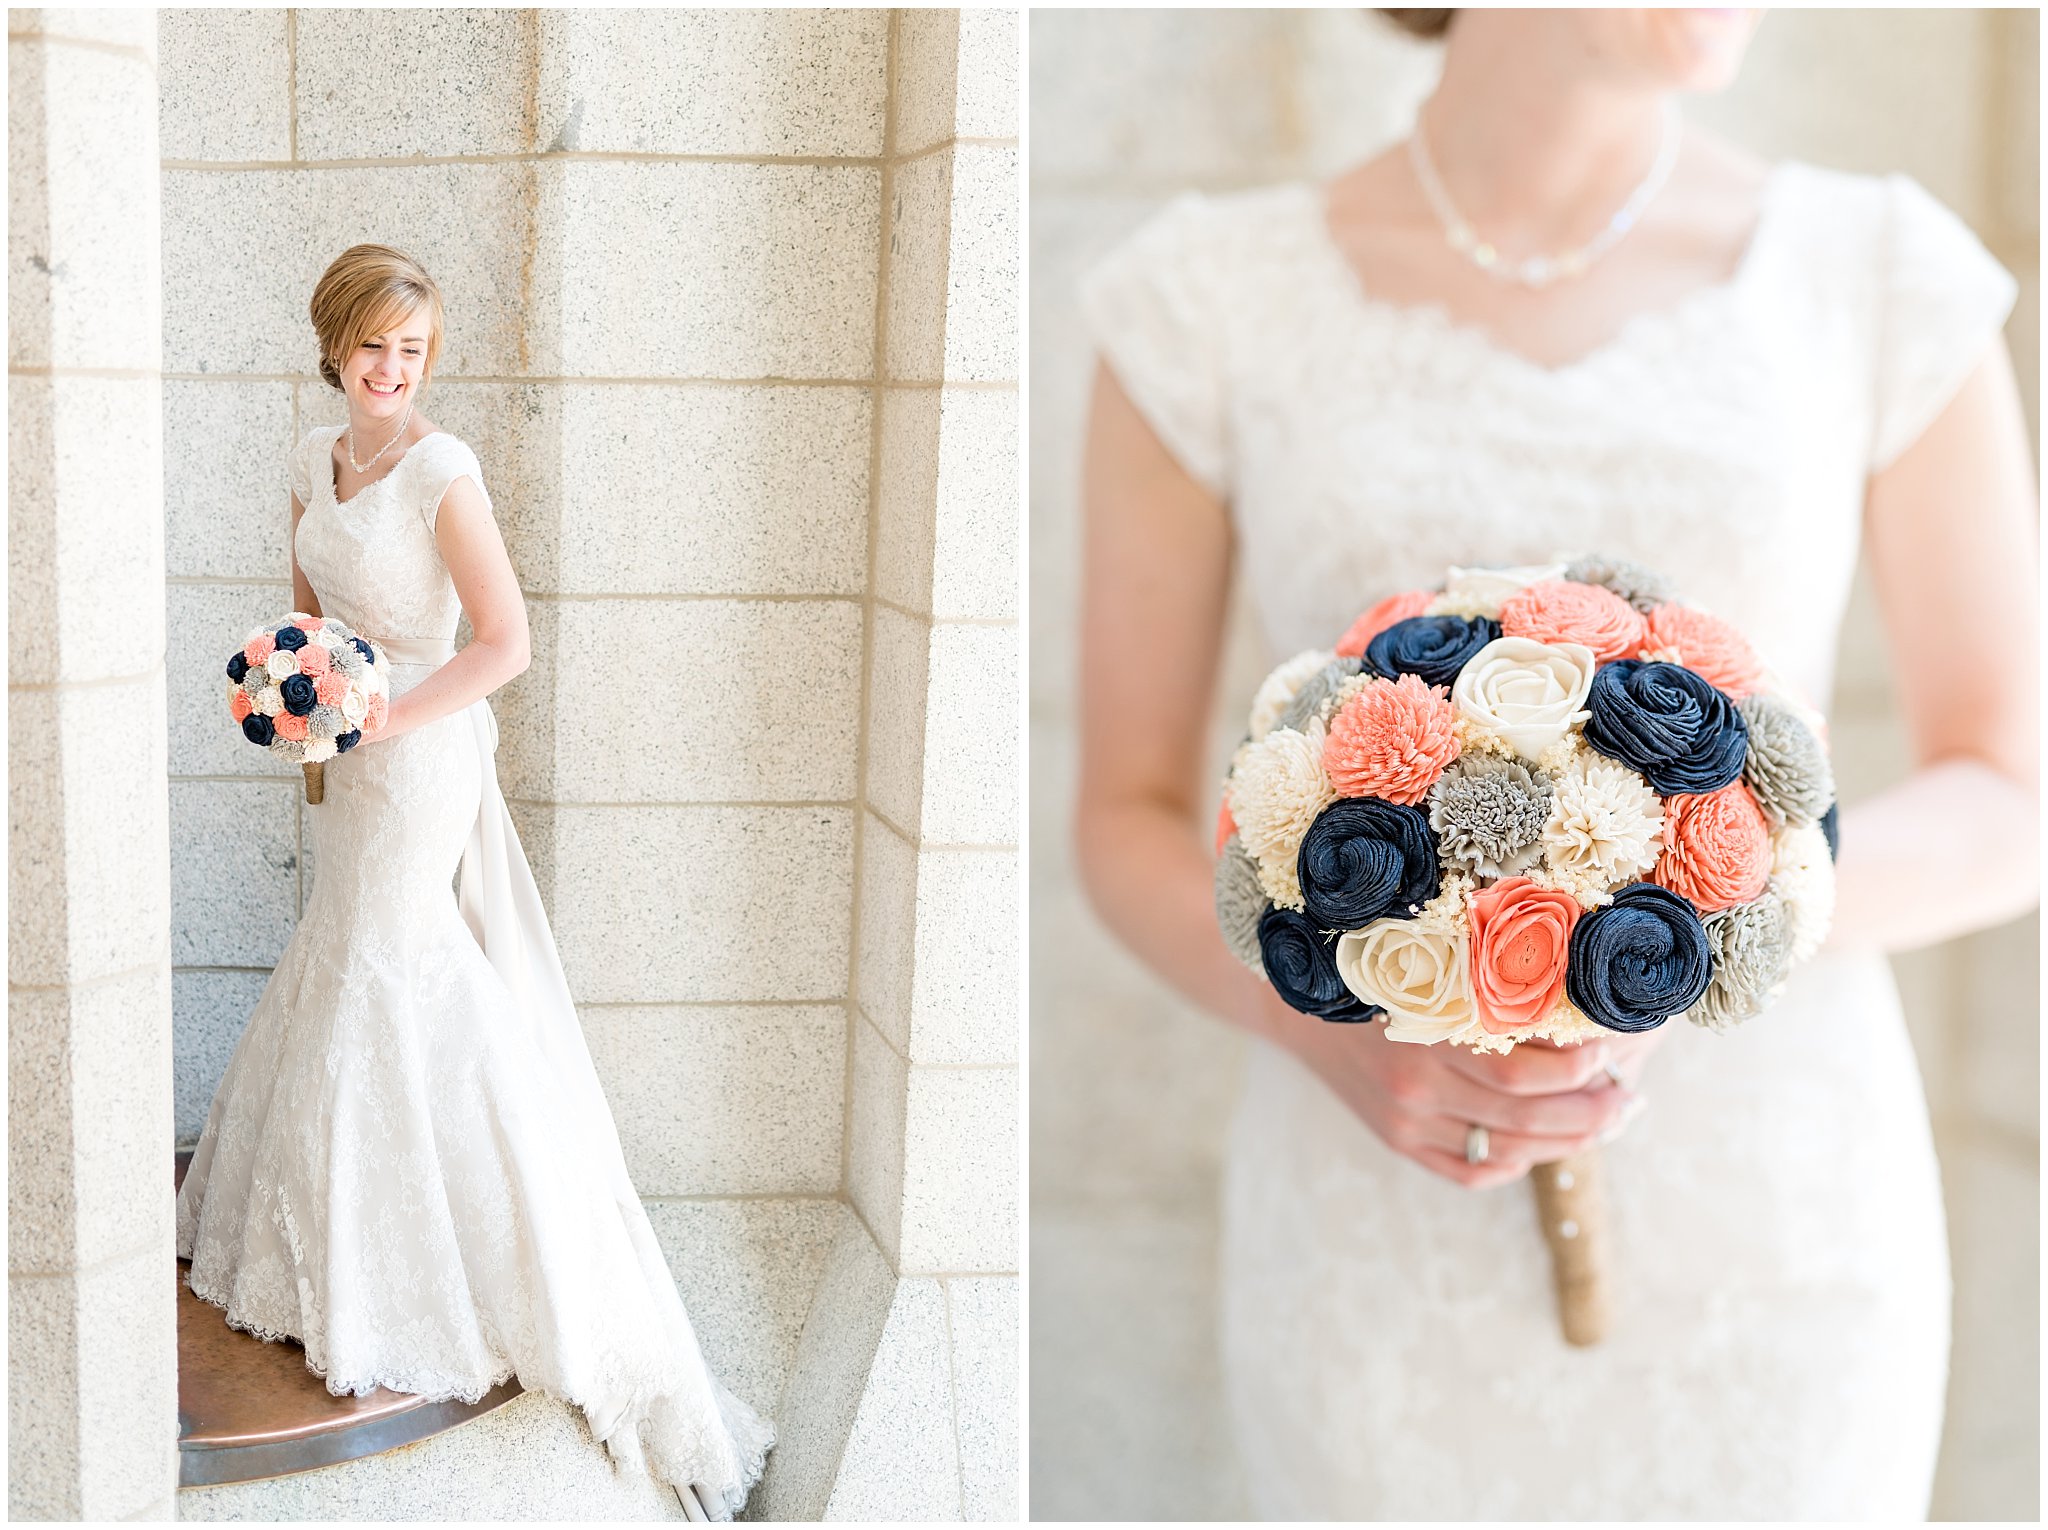 Salt Lake Temple spring wedding | Coral and grey wedding | Bride and groom pictures in the alcove